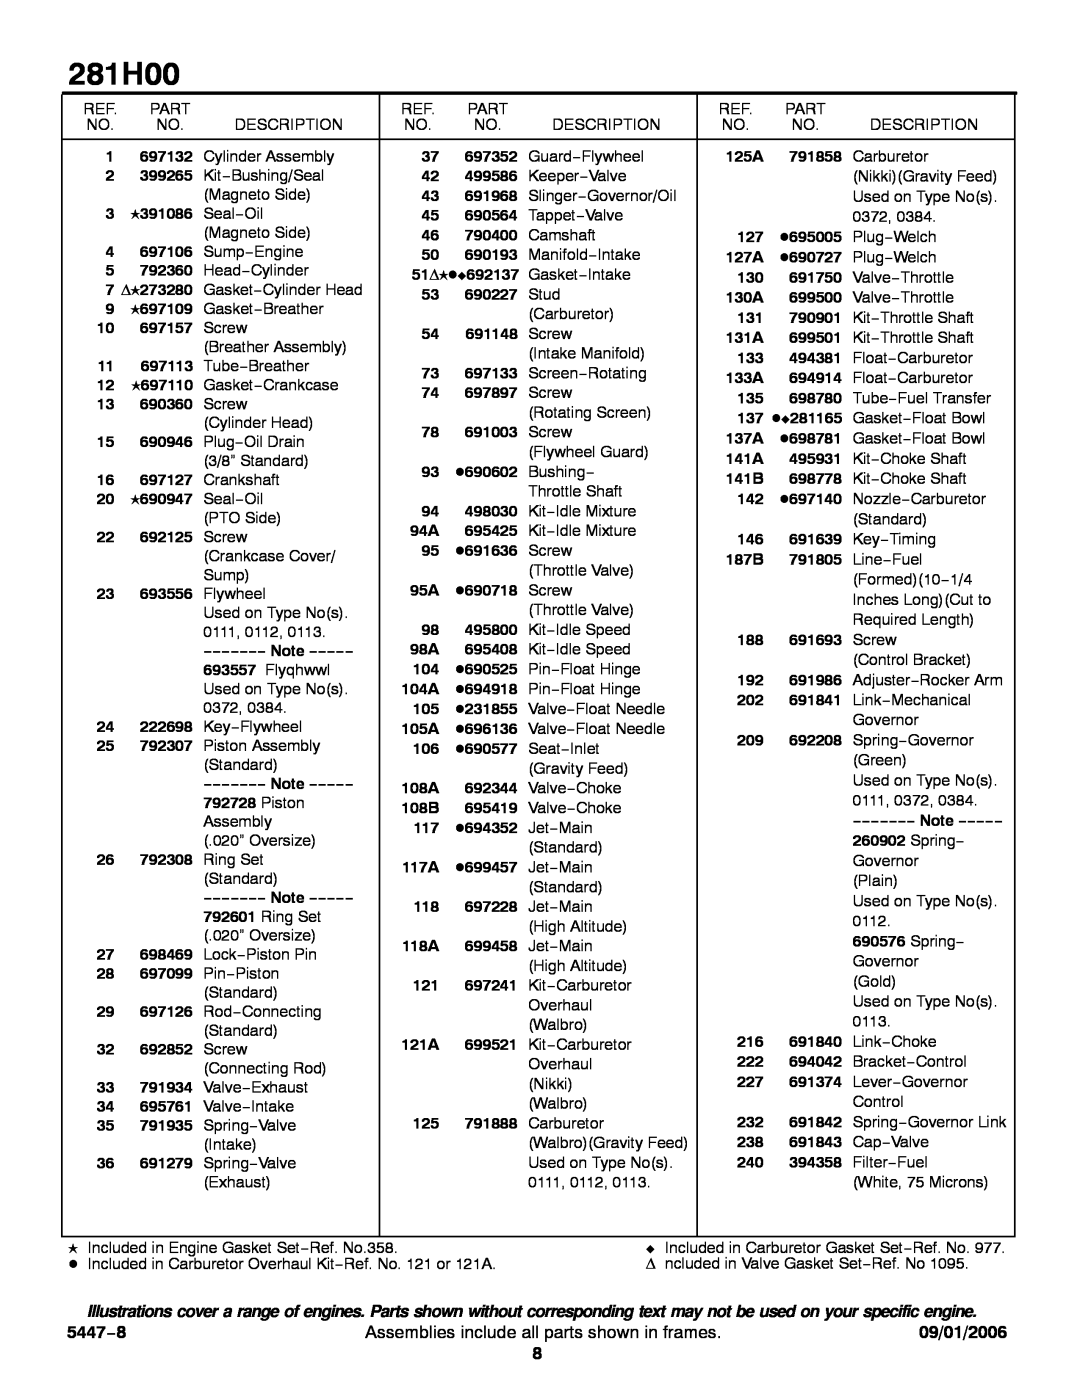 Briggs & Stratton 281H00 service manual 5447−8, Assemblies include all parts shown in frames, 09/01/2006 